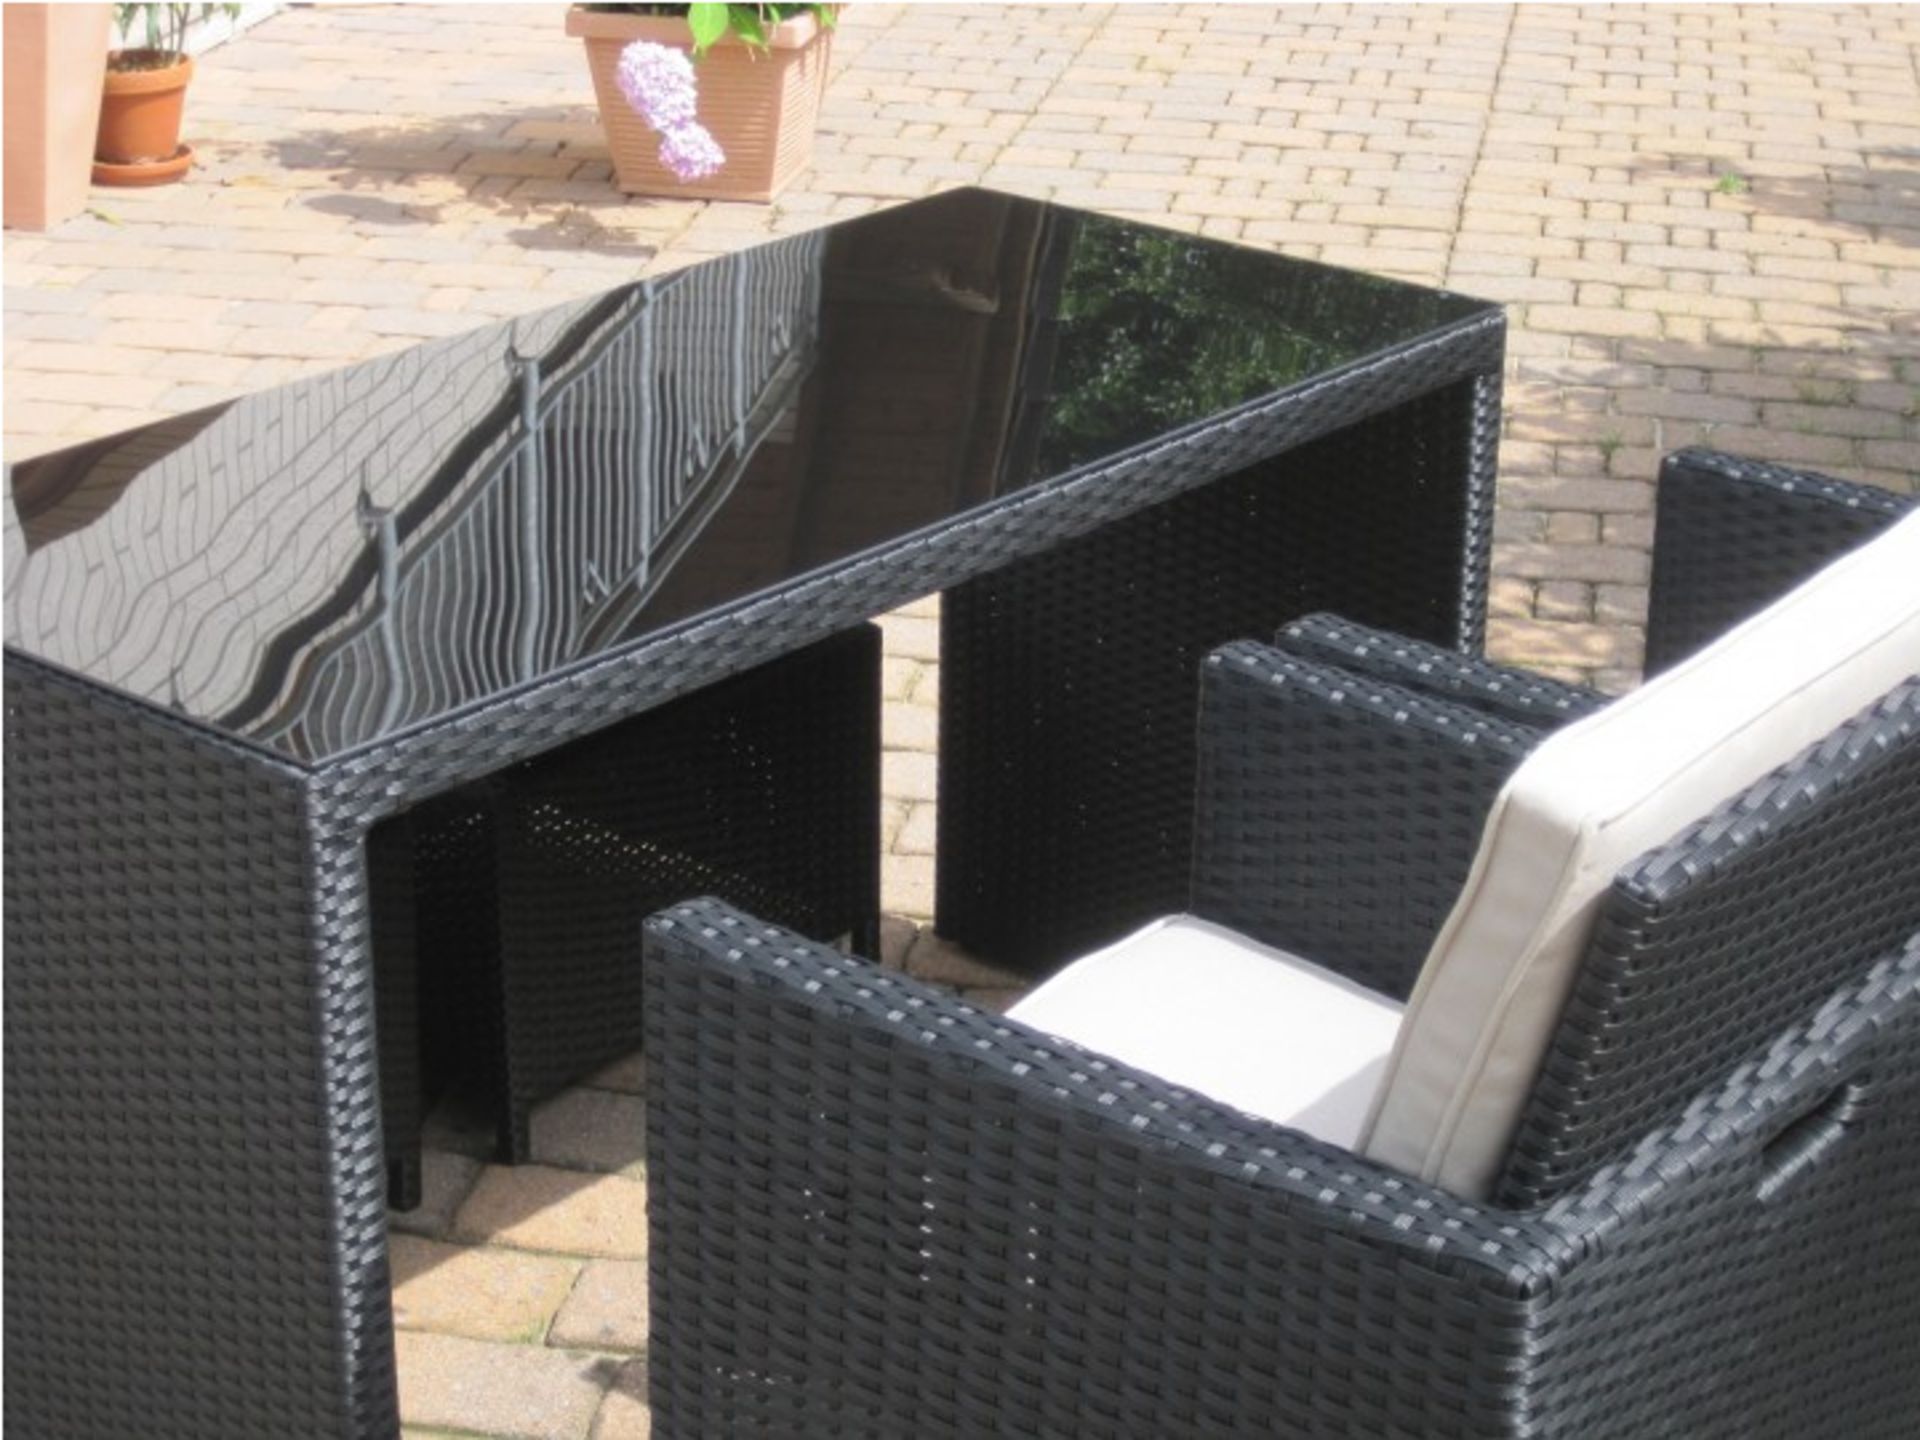 NEW Toscana balcony furniture set in Black - Image 4 of 10